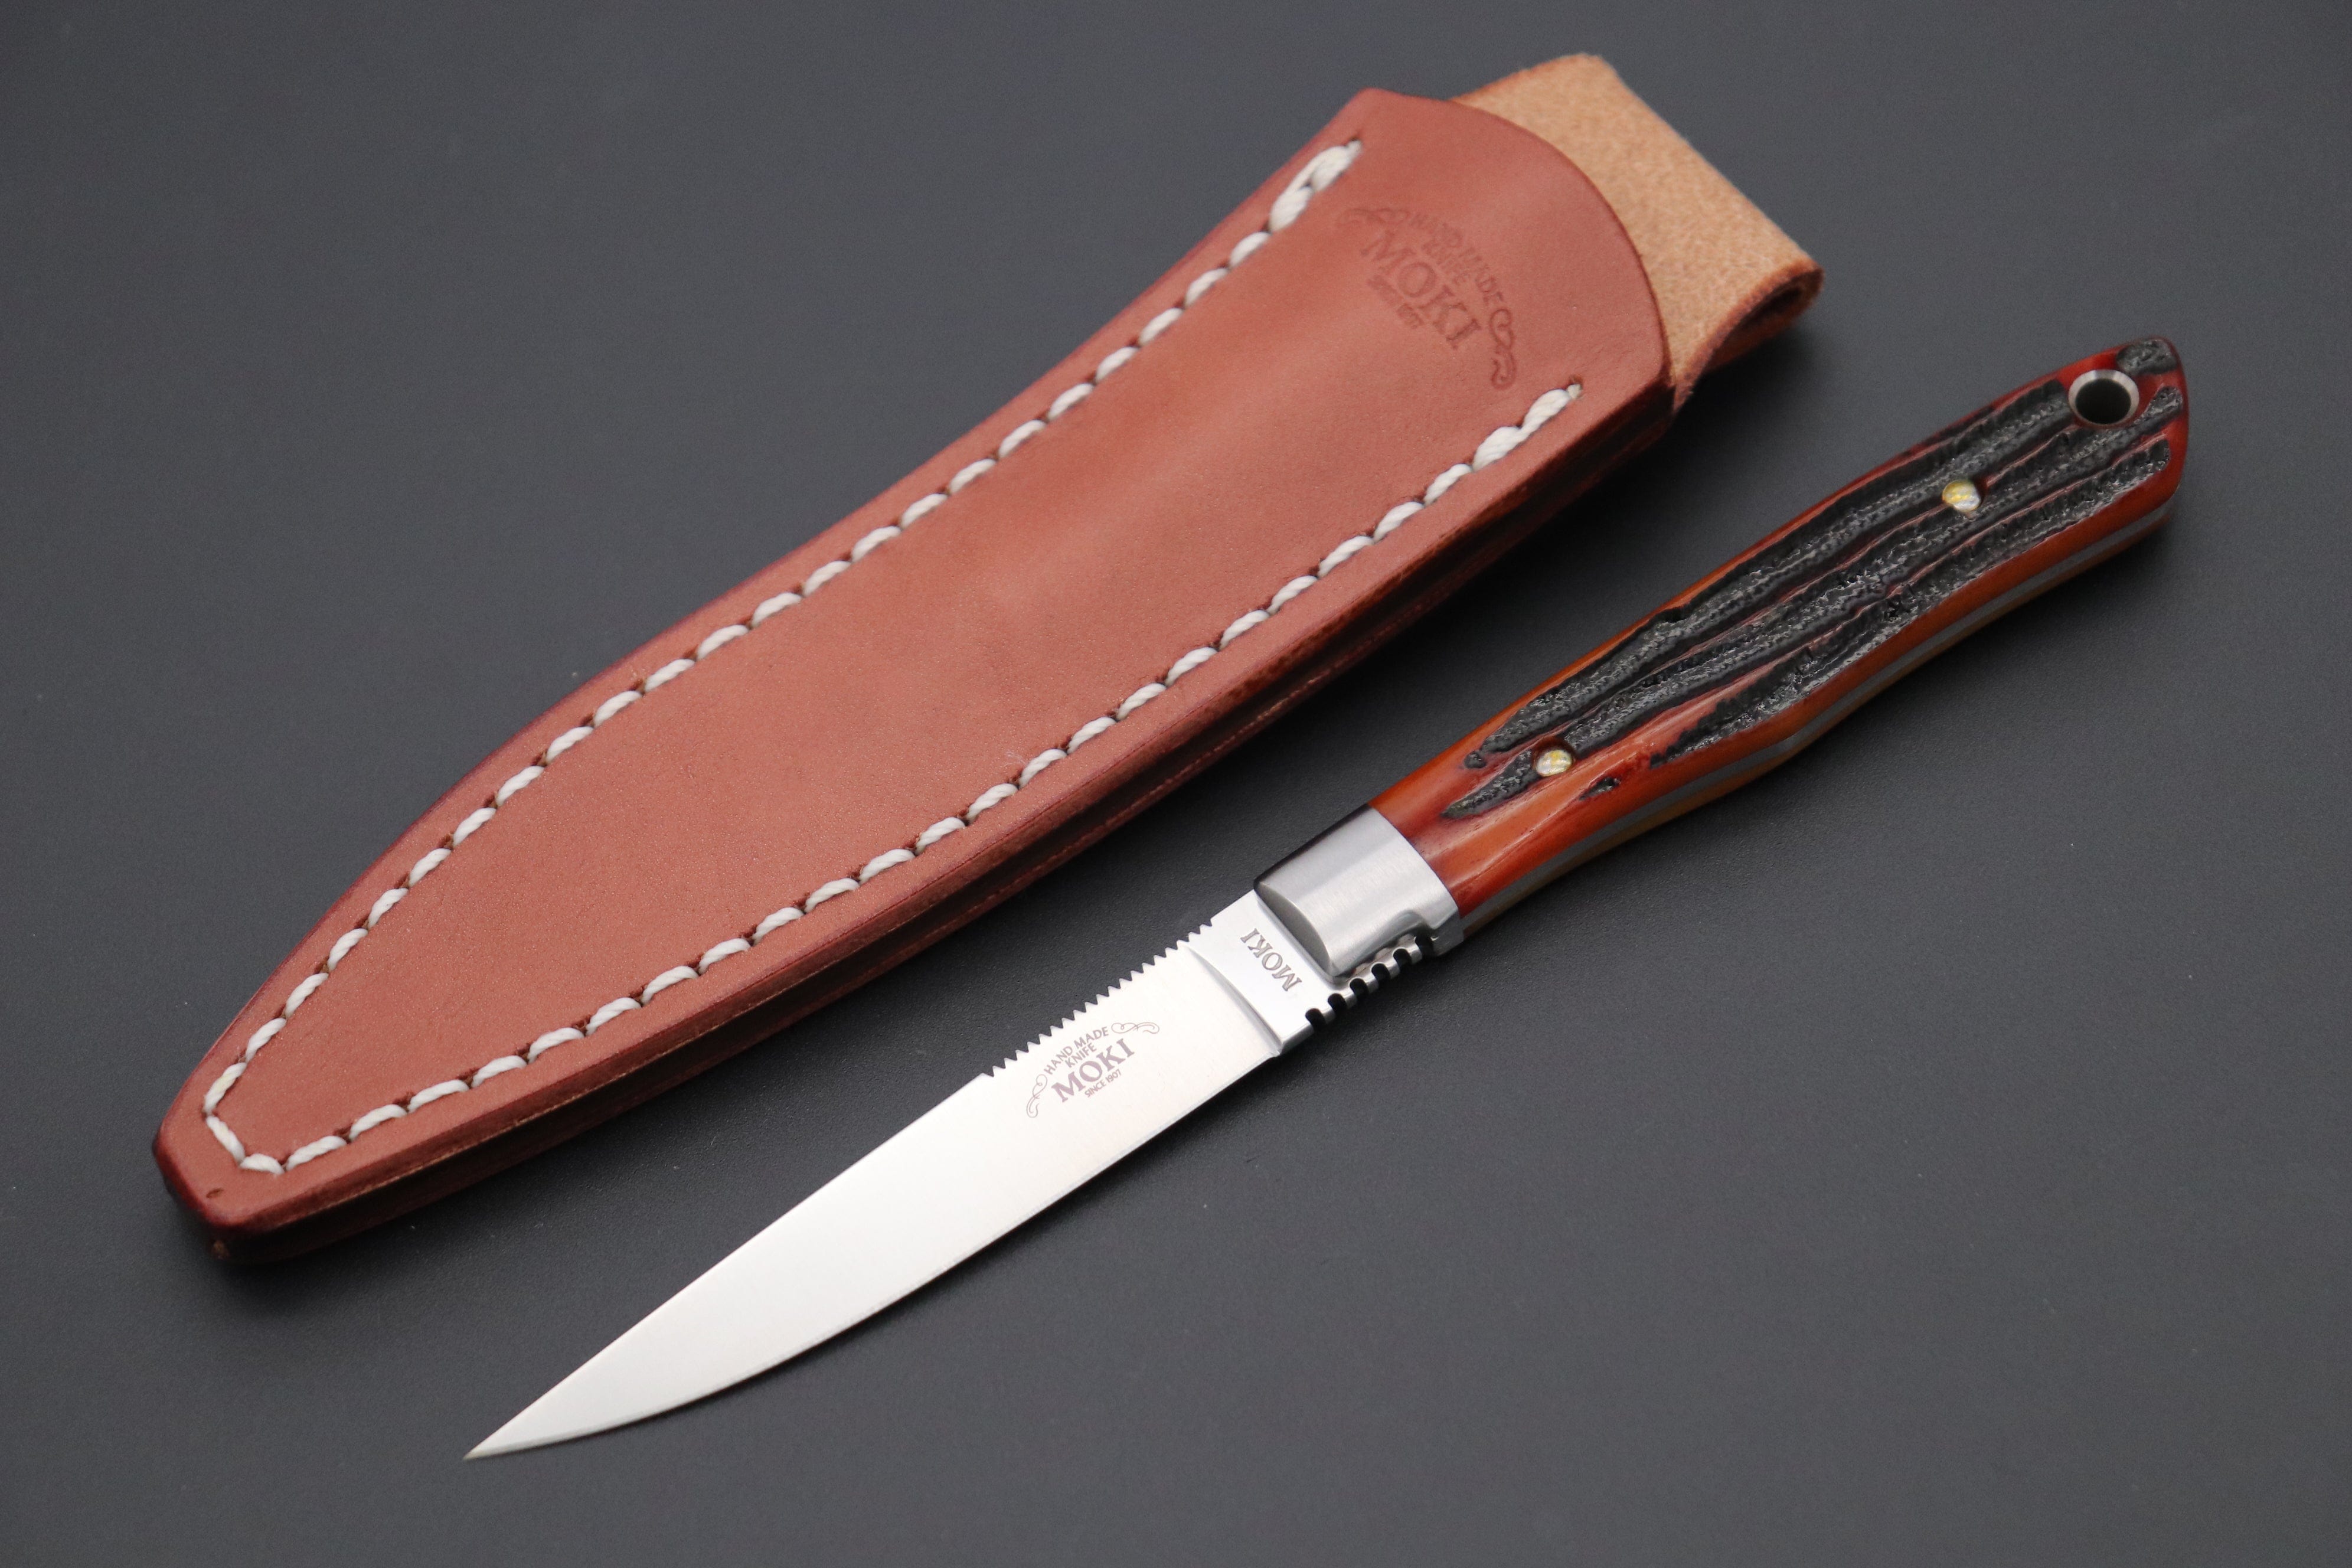 Jerry Snell Custom Bird and Trout Knife